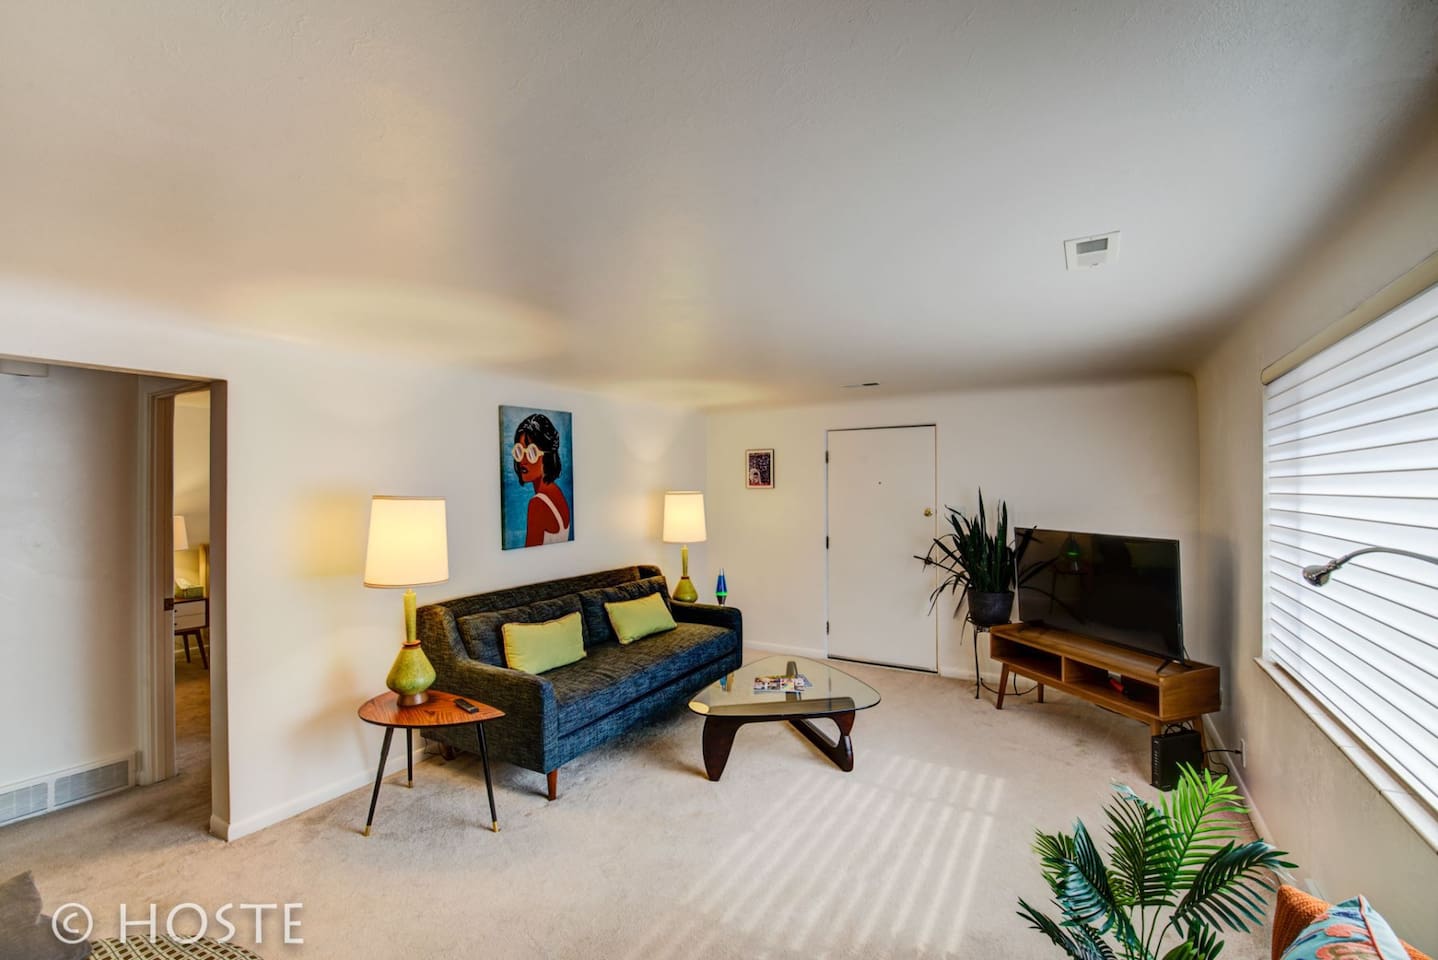 Property Image 1 - 1BR, 70’s Inspired, Close To Broadmoor & Downtown